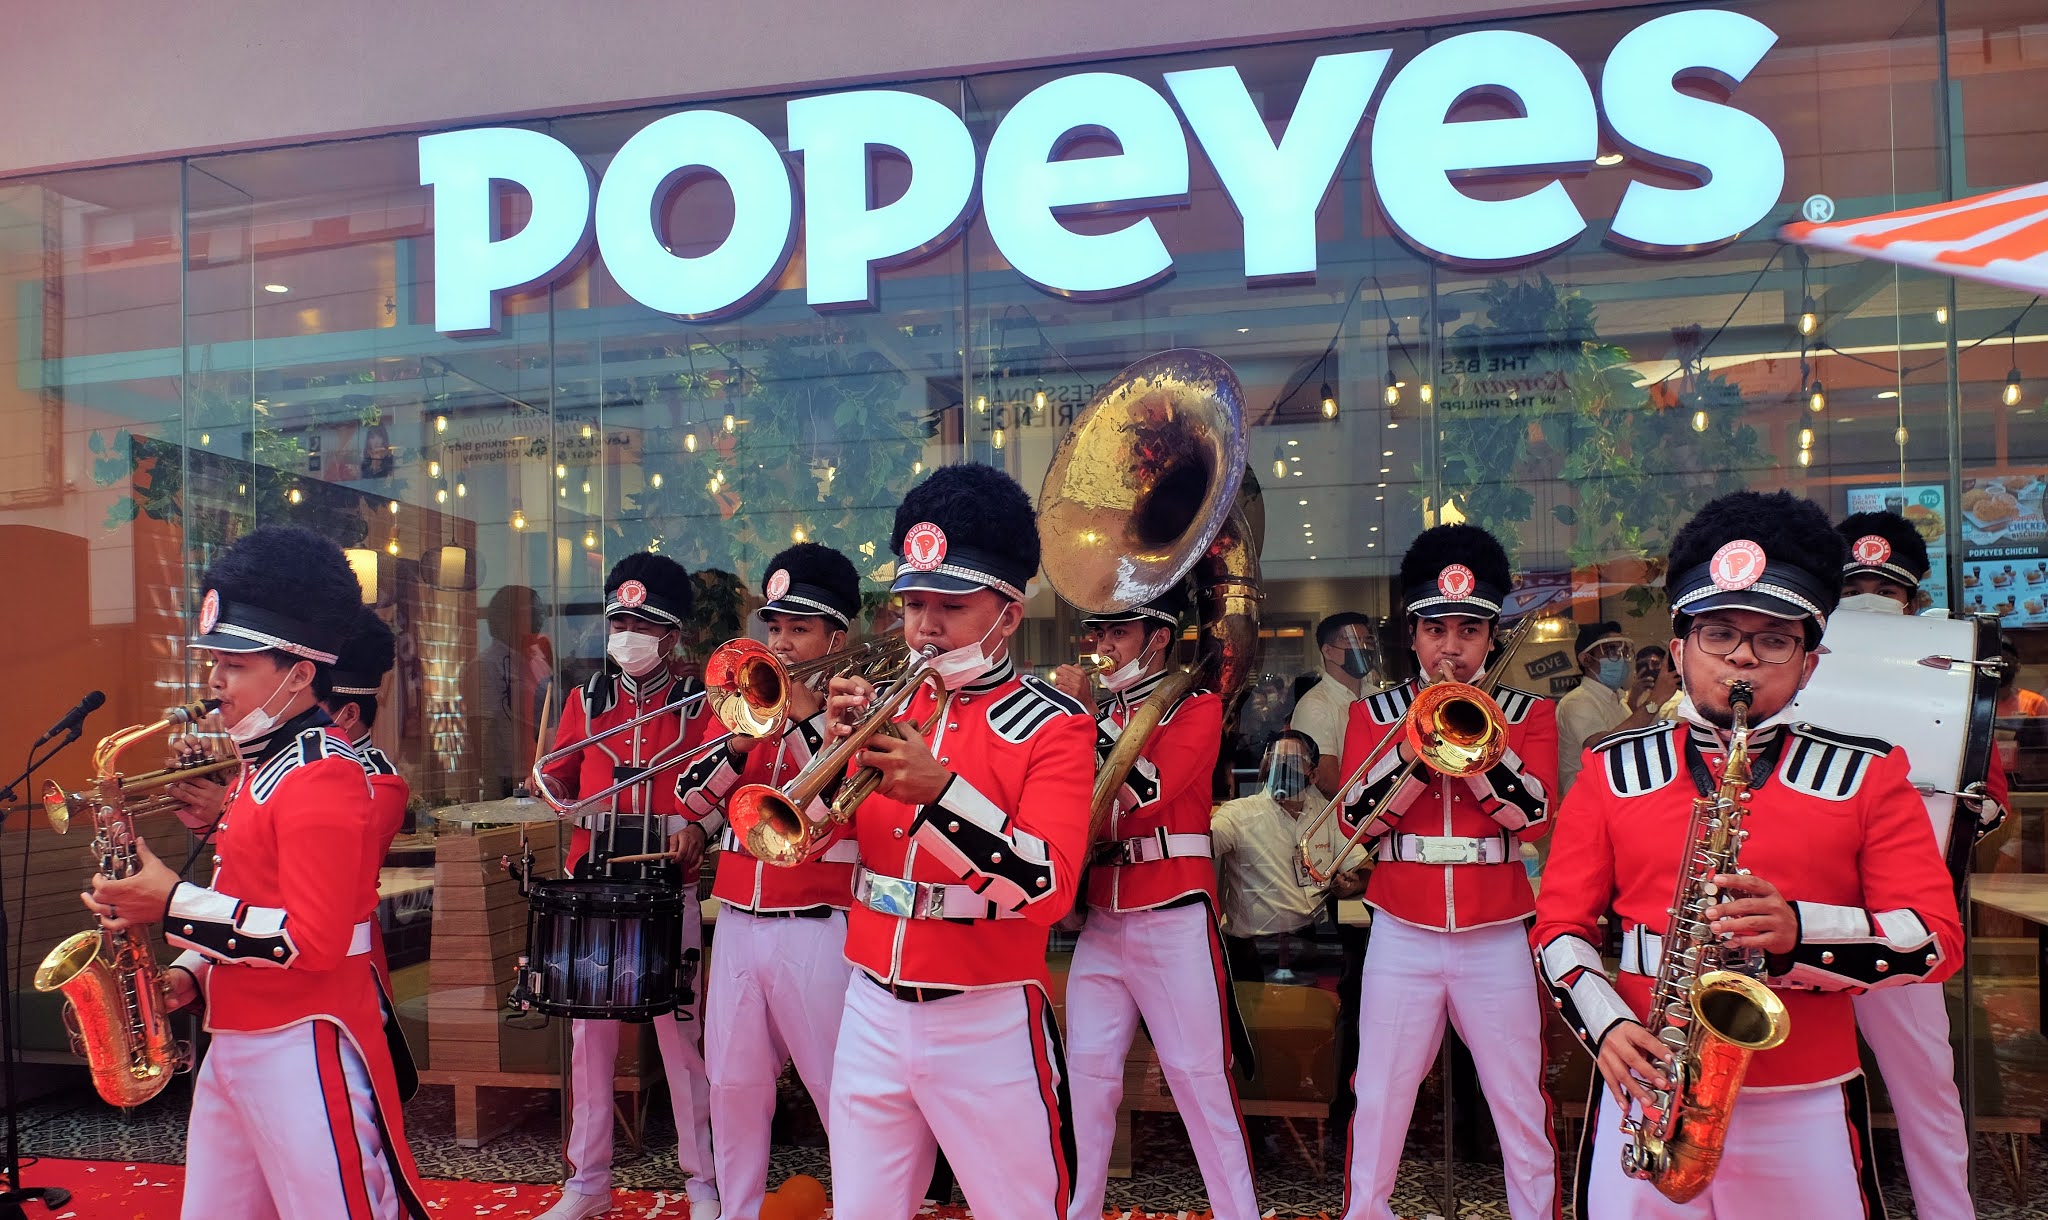 Manila Shopper: The biggest Popeyes restaurant in South East Asia now open at SM Mall of Asia